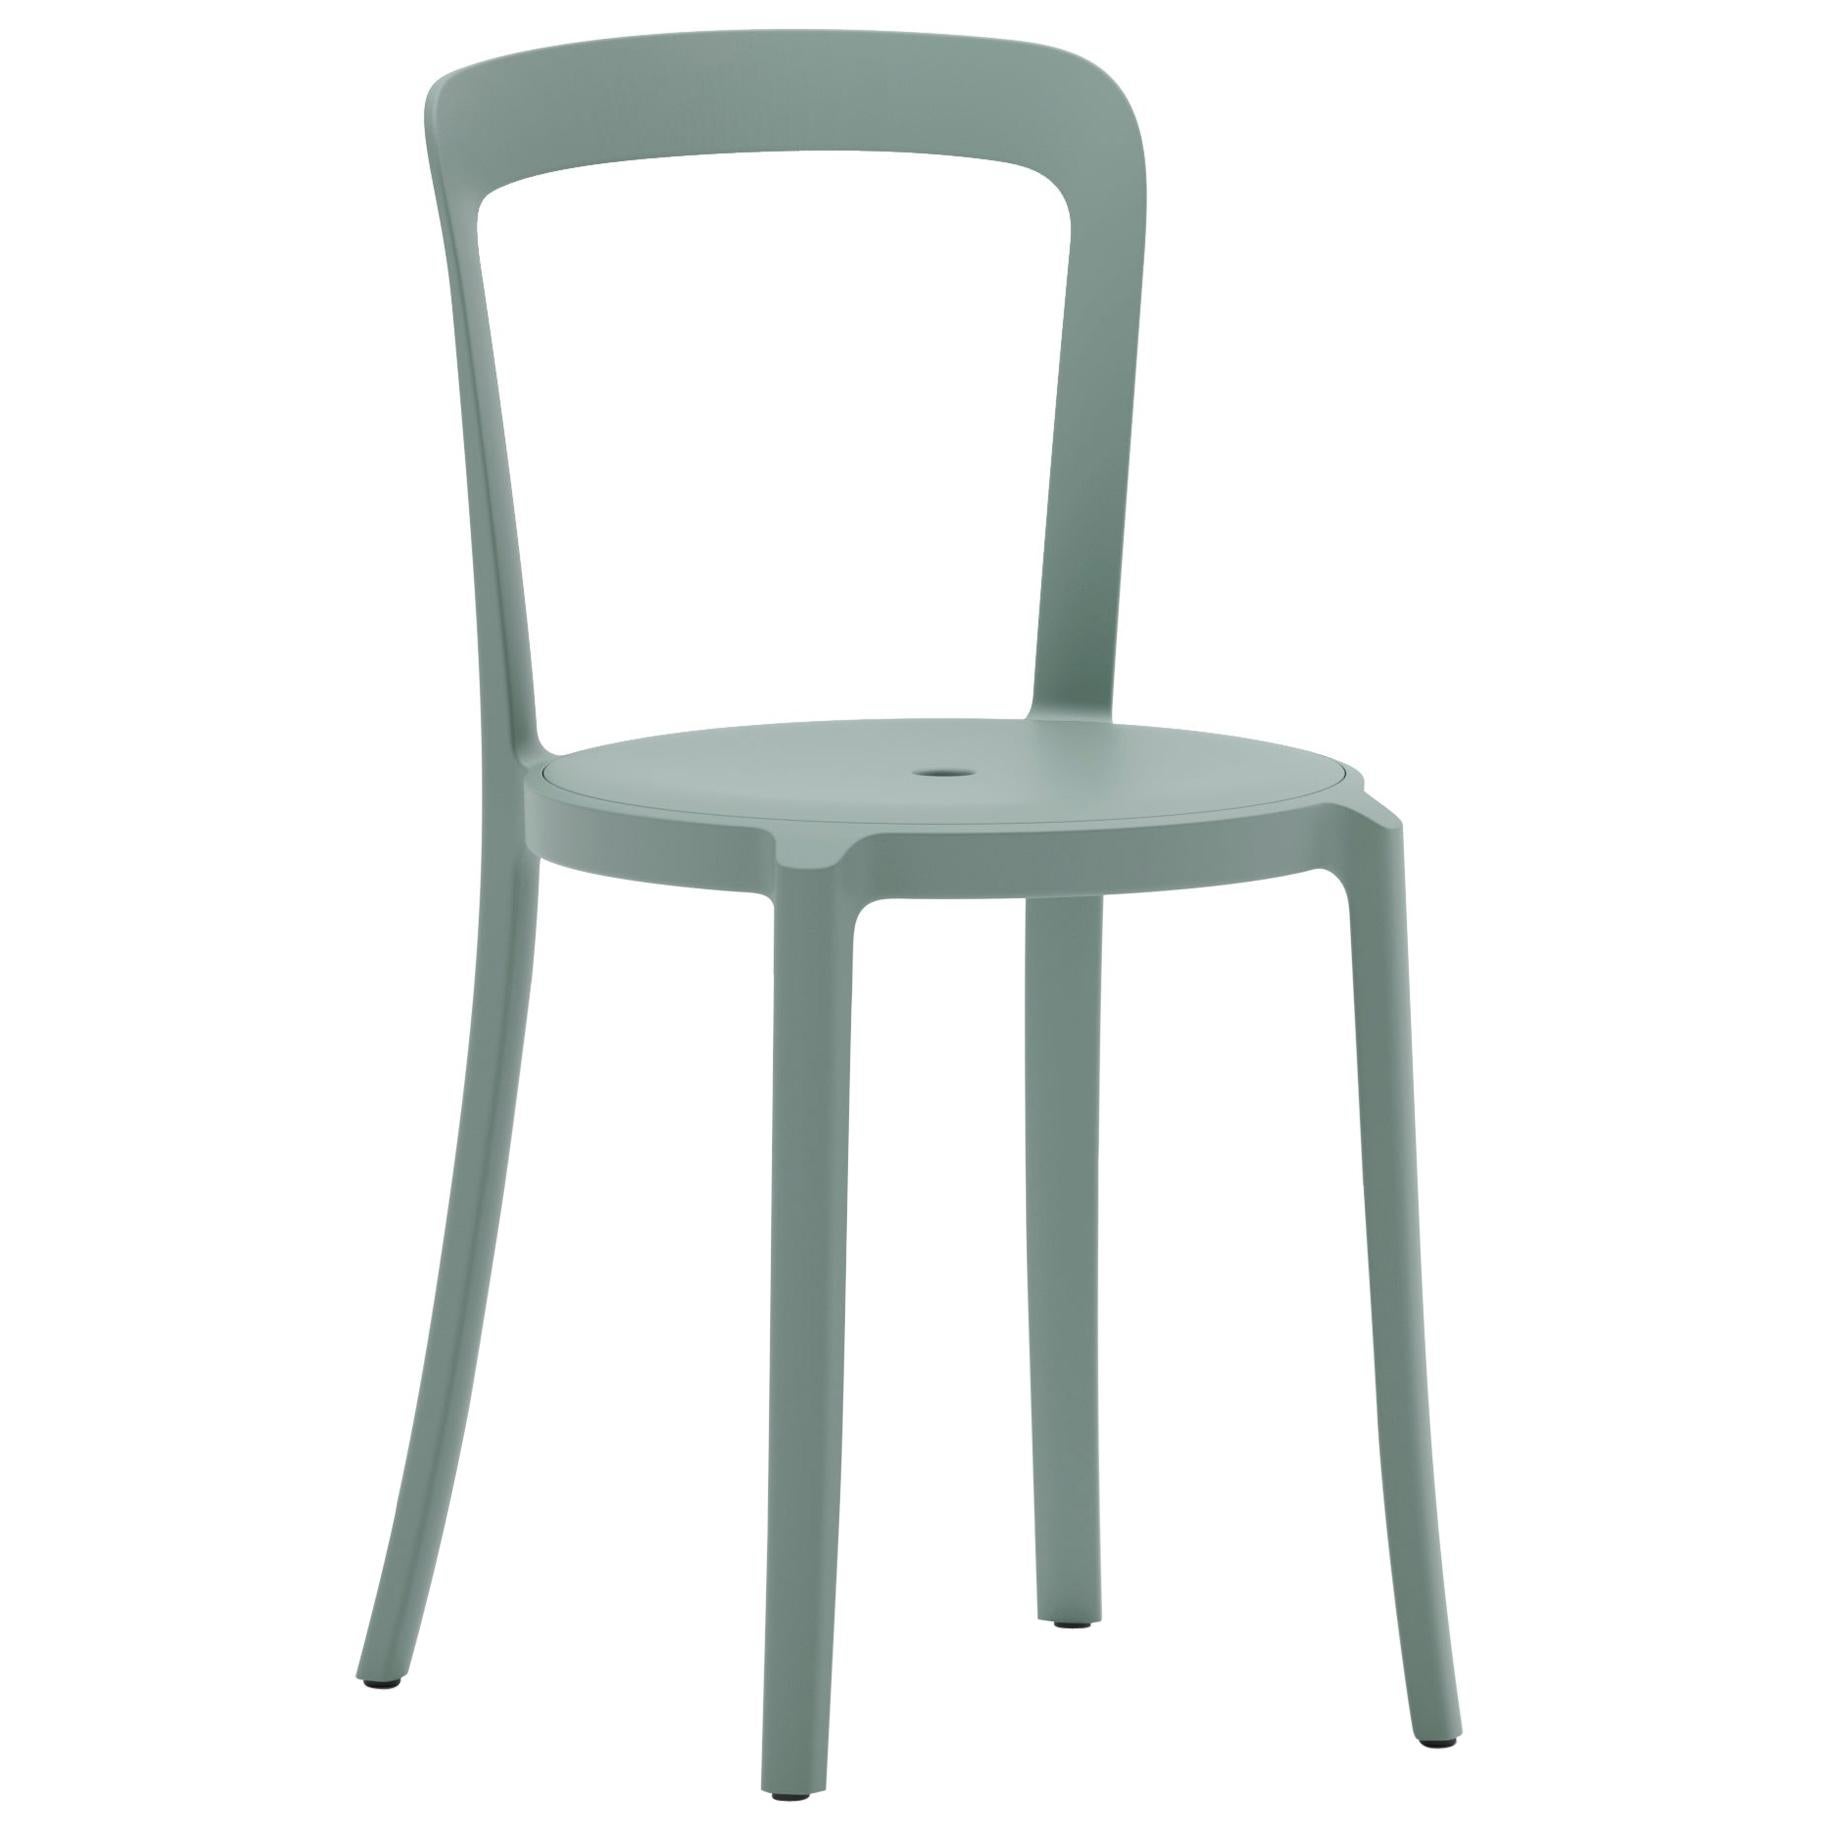 On & On Stacking Chair in Plastic with Light Blue Frame by Barber & Osgerby